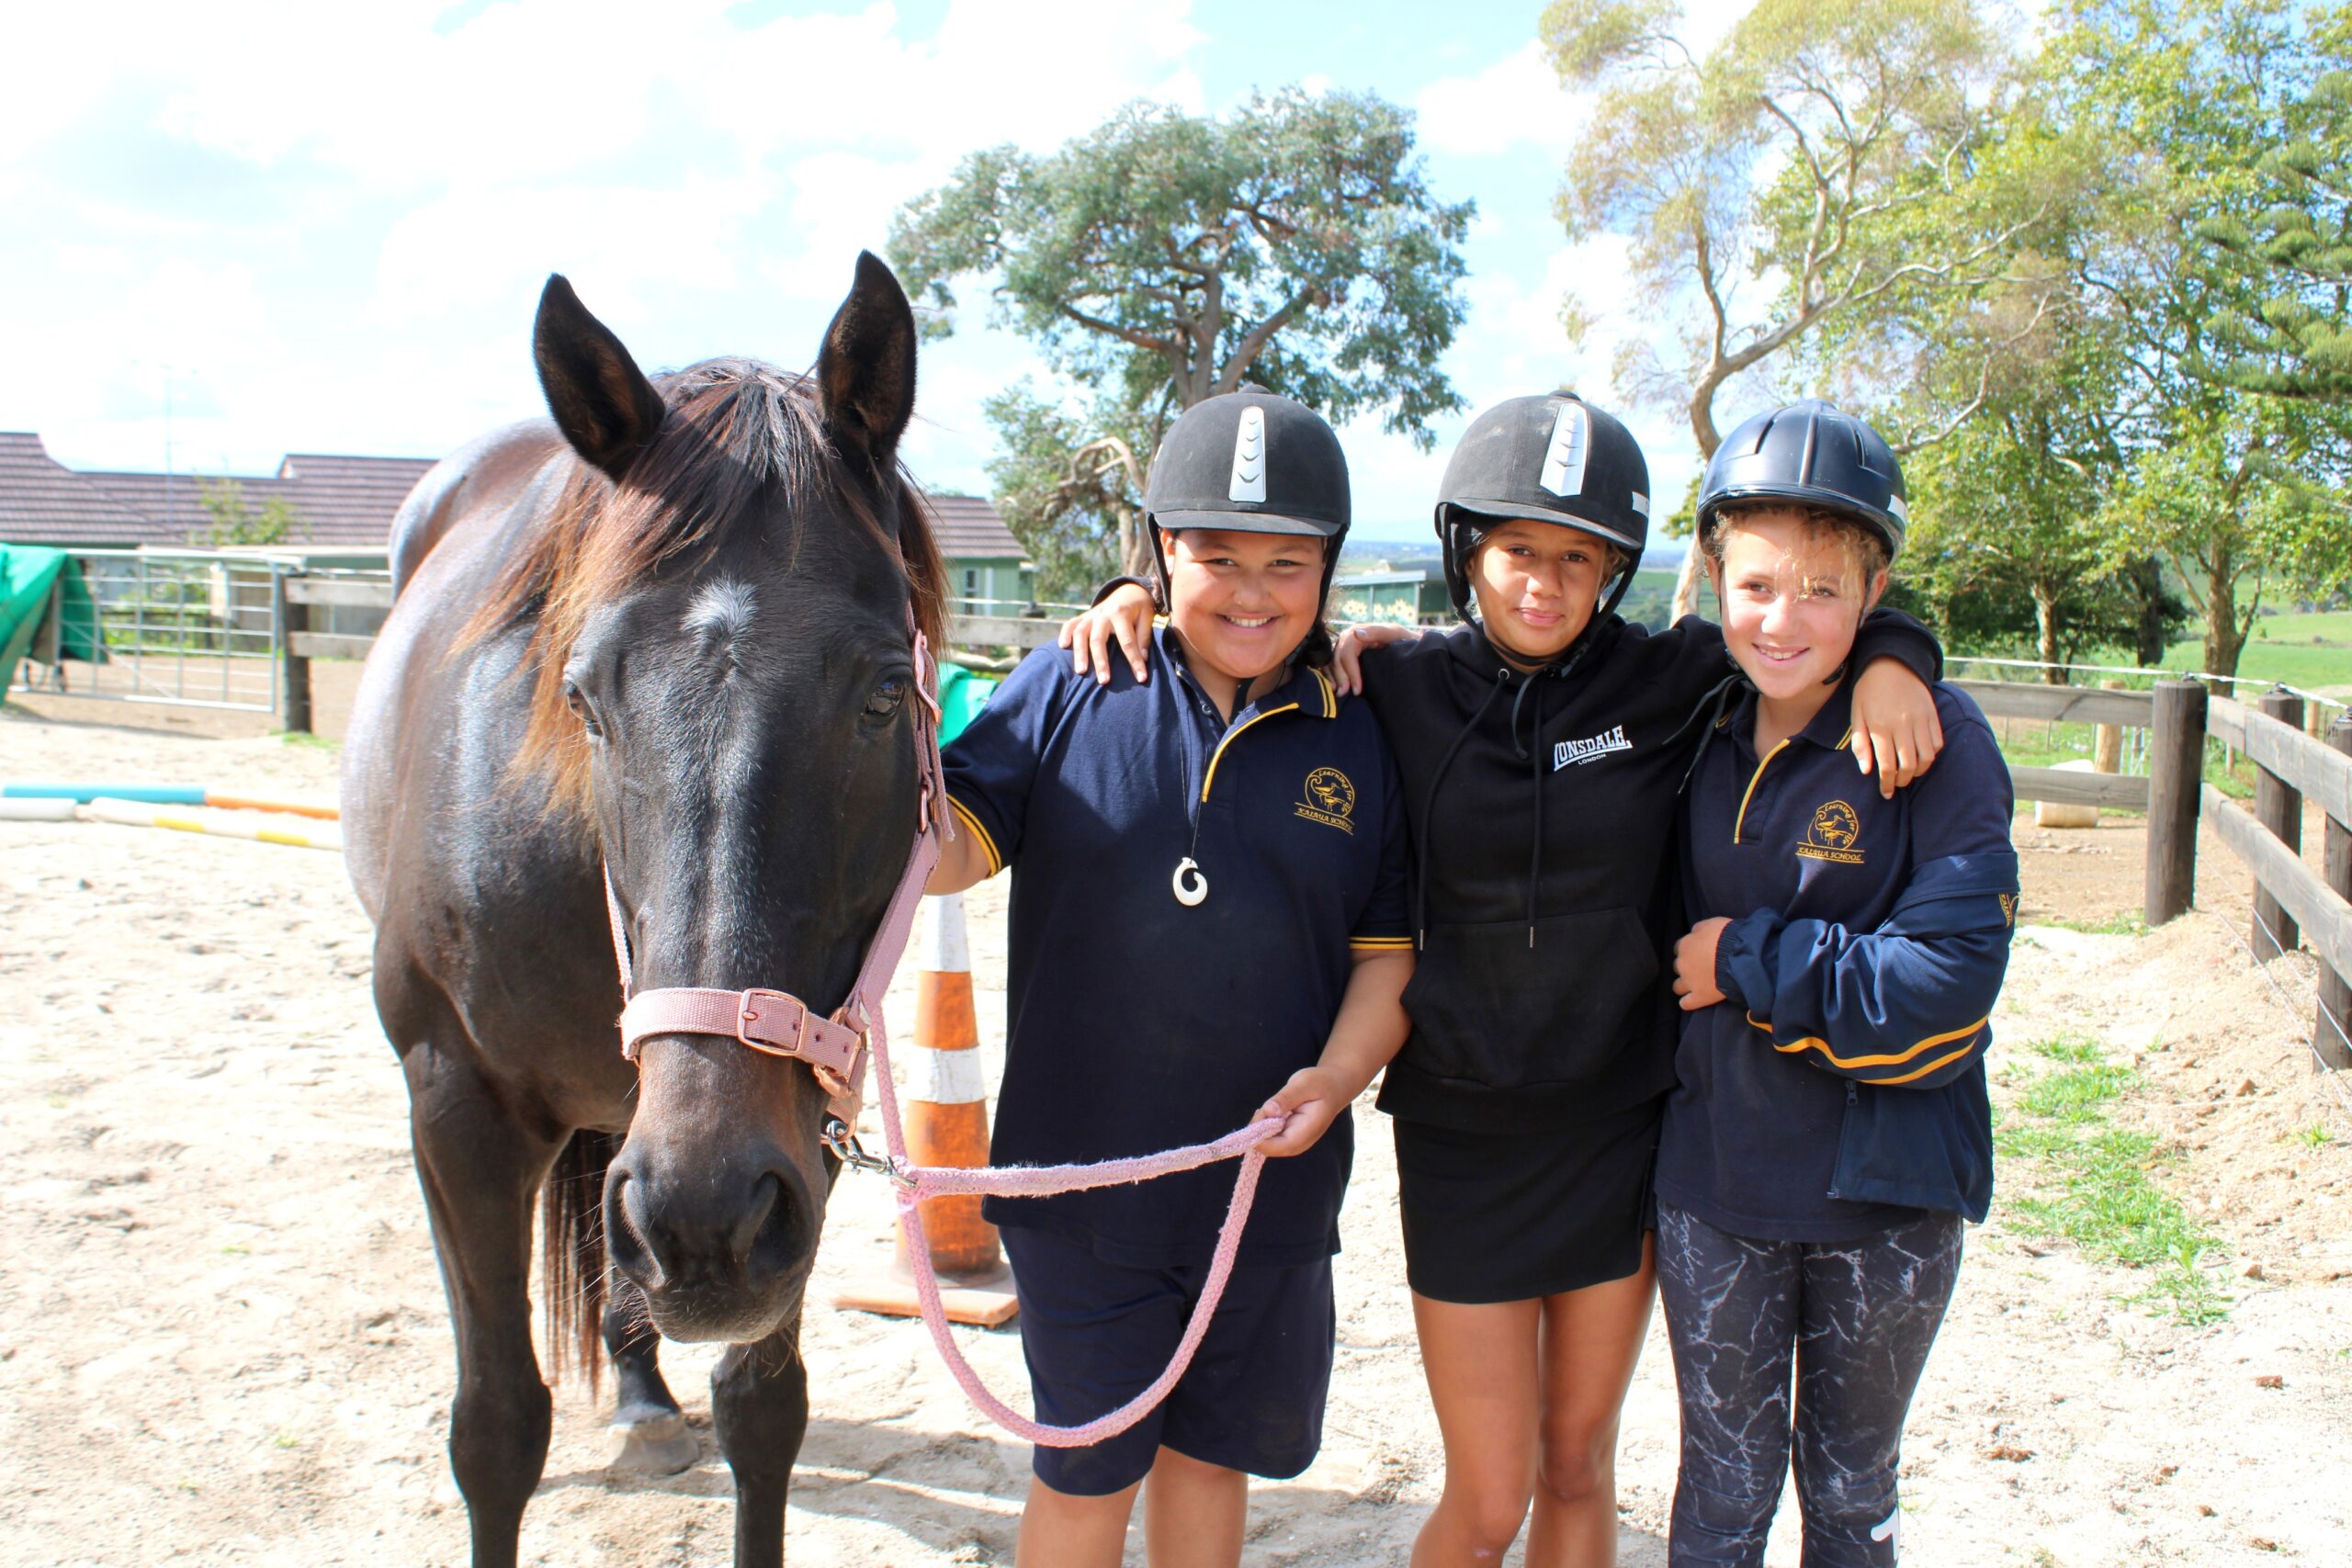 You are currently viewing ‘Incredibly courageous’: school seeks help through horses